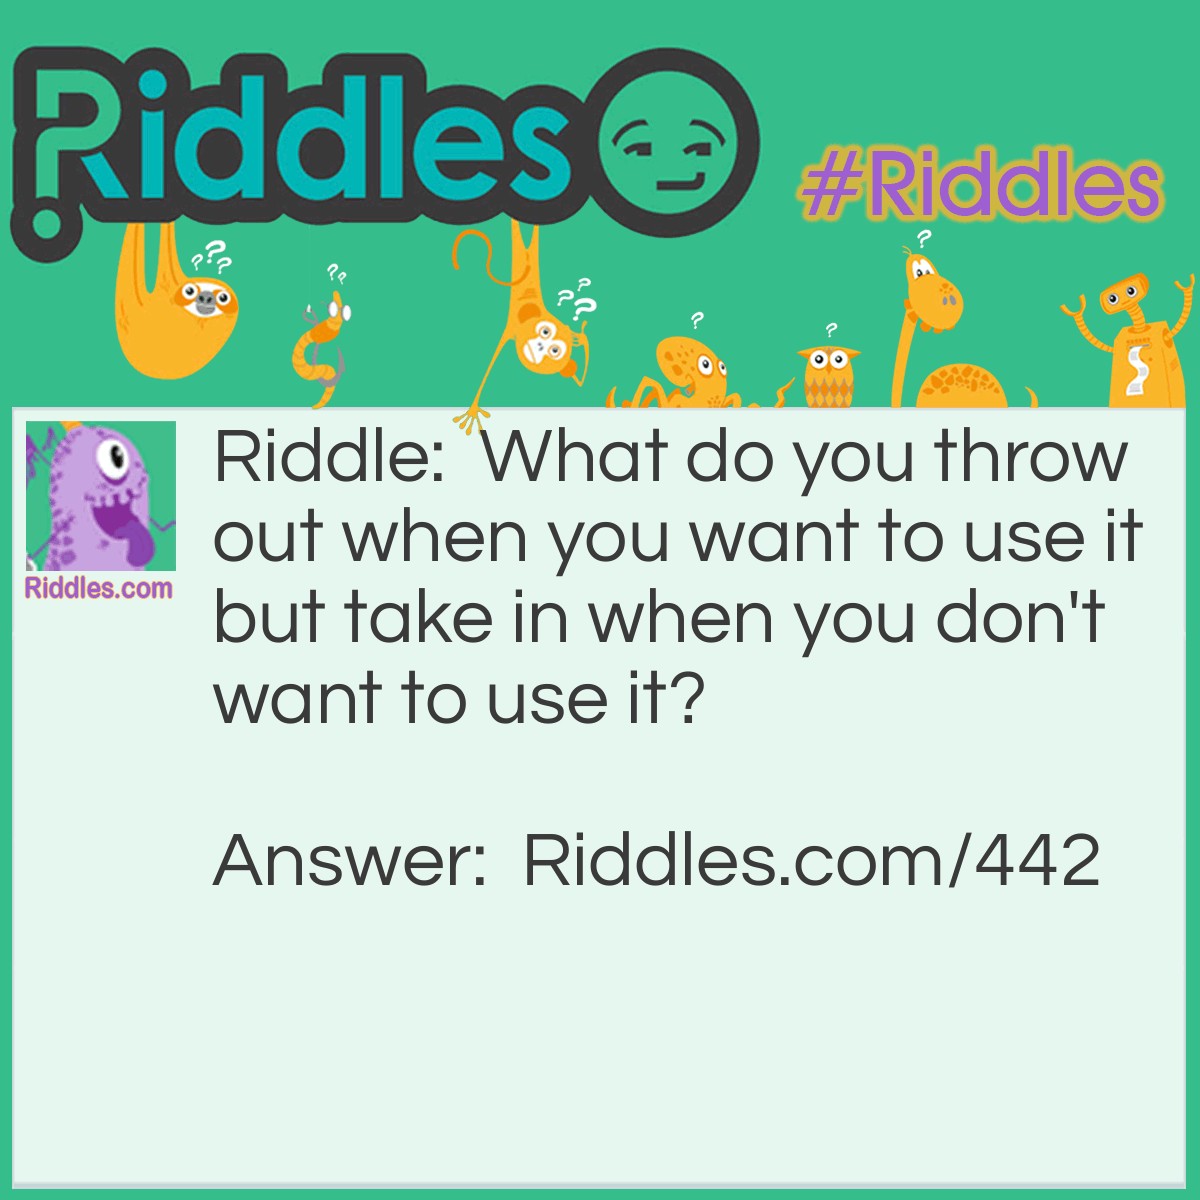 Riddle: What do you throw out when you want to use it but take in when you don't want to use it? Answer: An anchor.